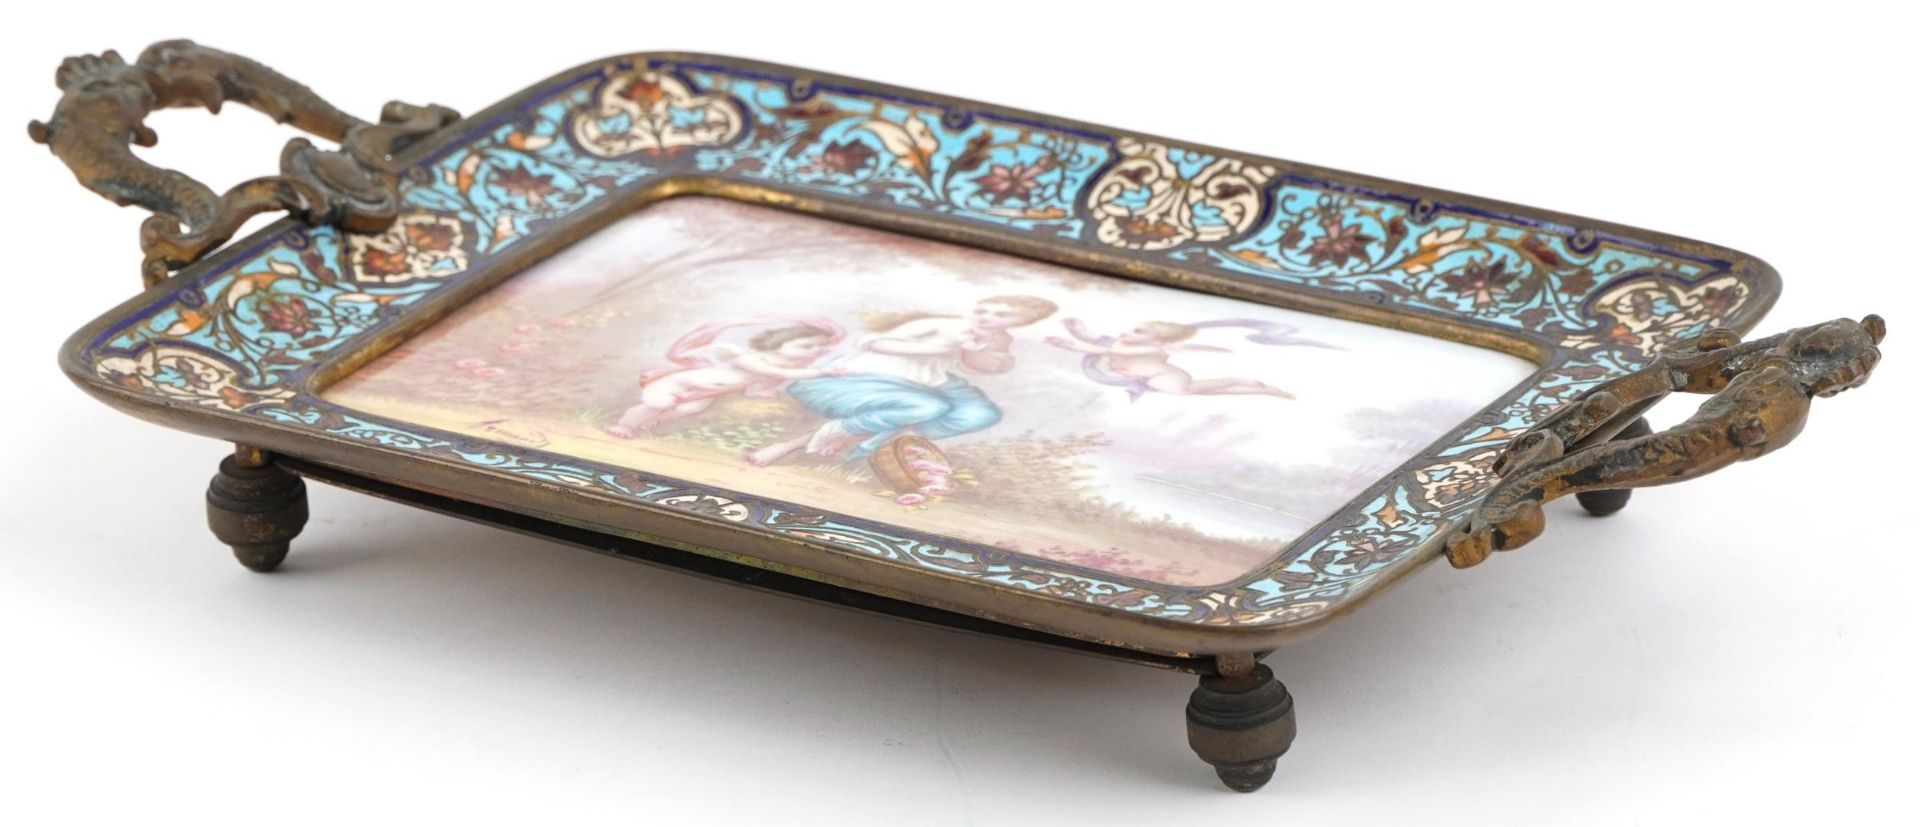 19th century French brass and champleve enamel four footed tray with twin dolphin handles inset with